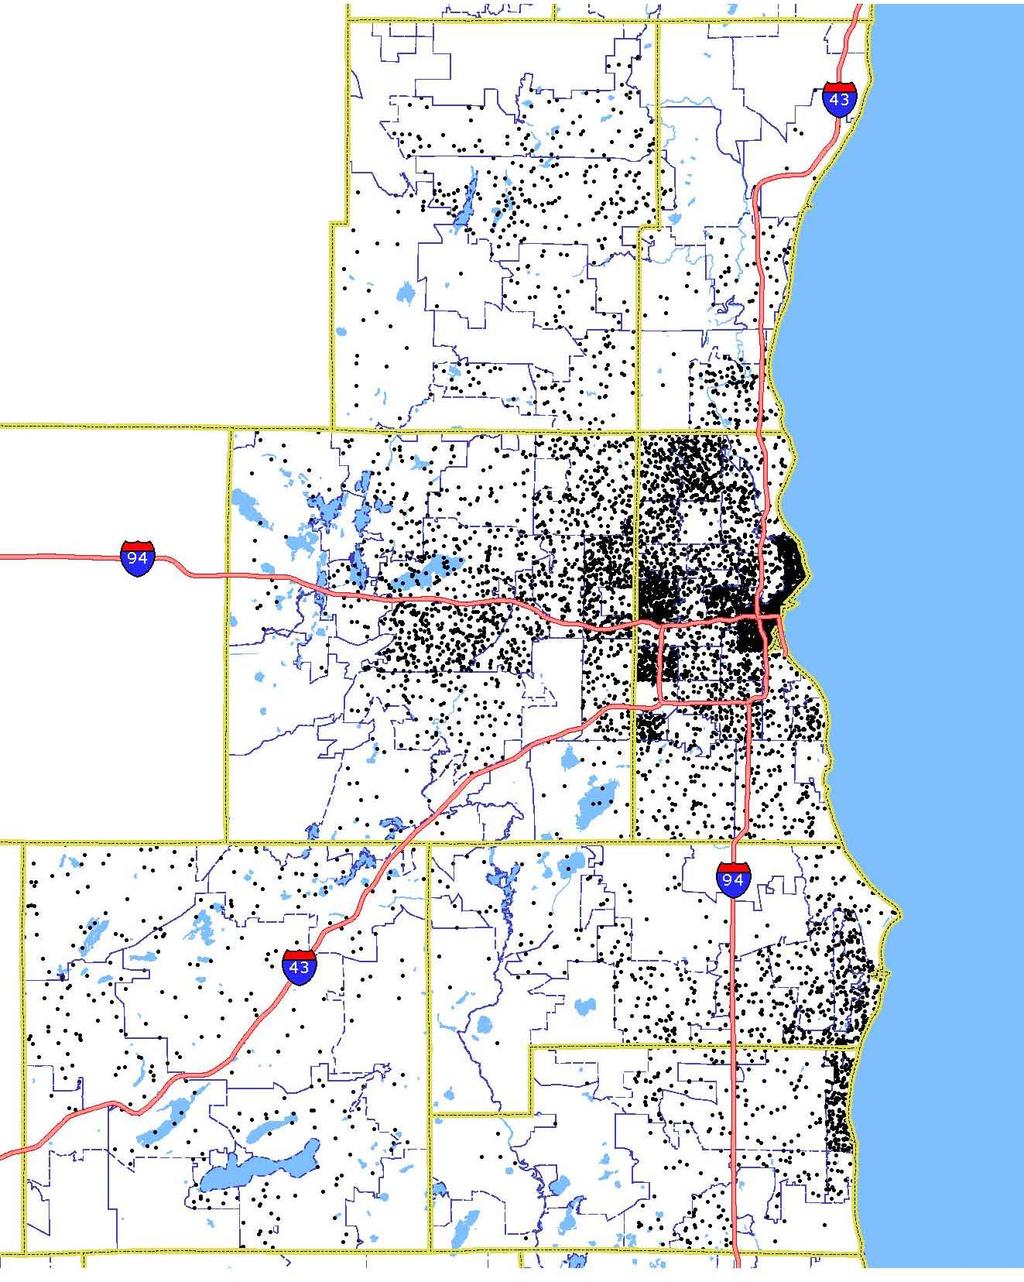 Location of Full-Time Job Openings in the Southeastern Wisconsin Region: 2009